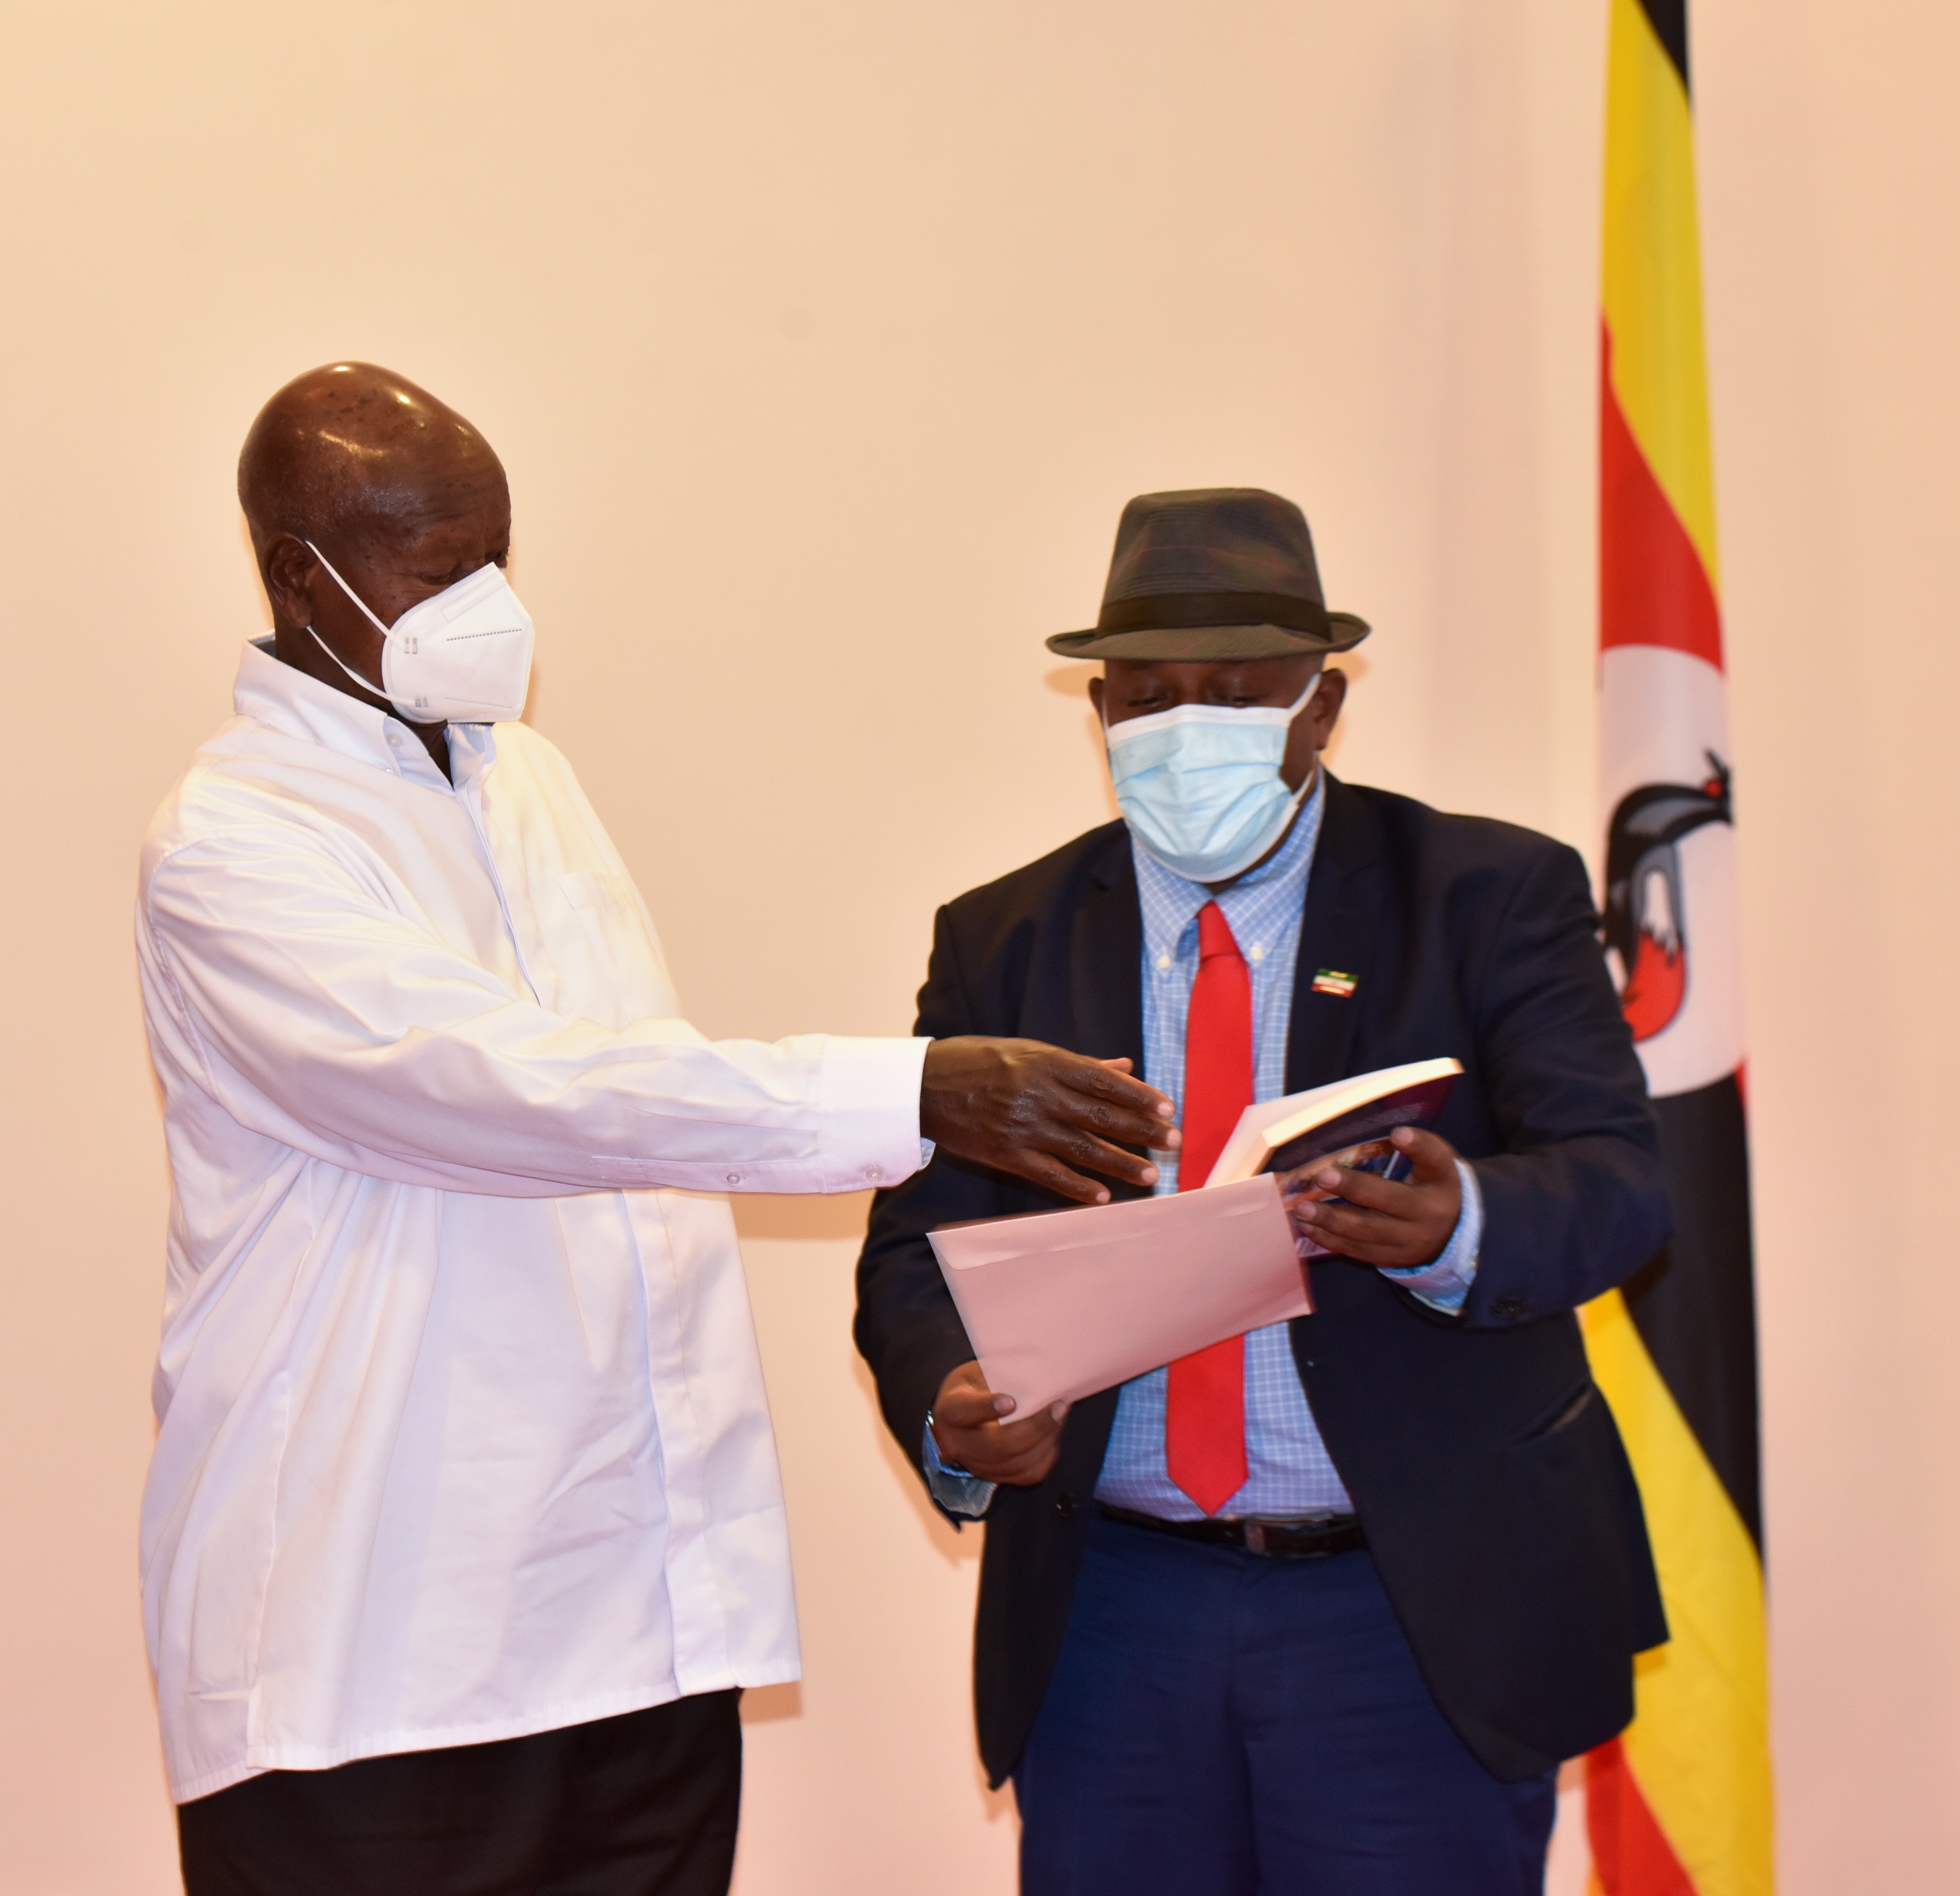 Museveni offers to mediate in Somalia and Somaliland unification efforts